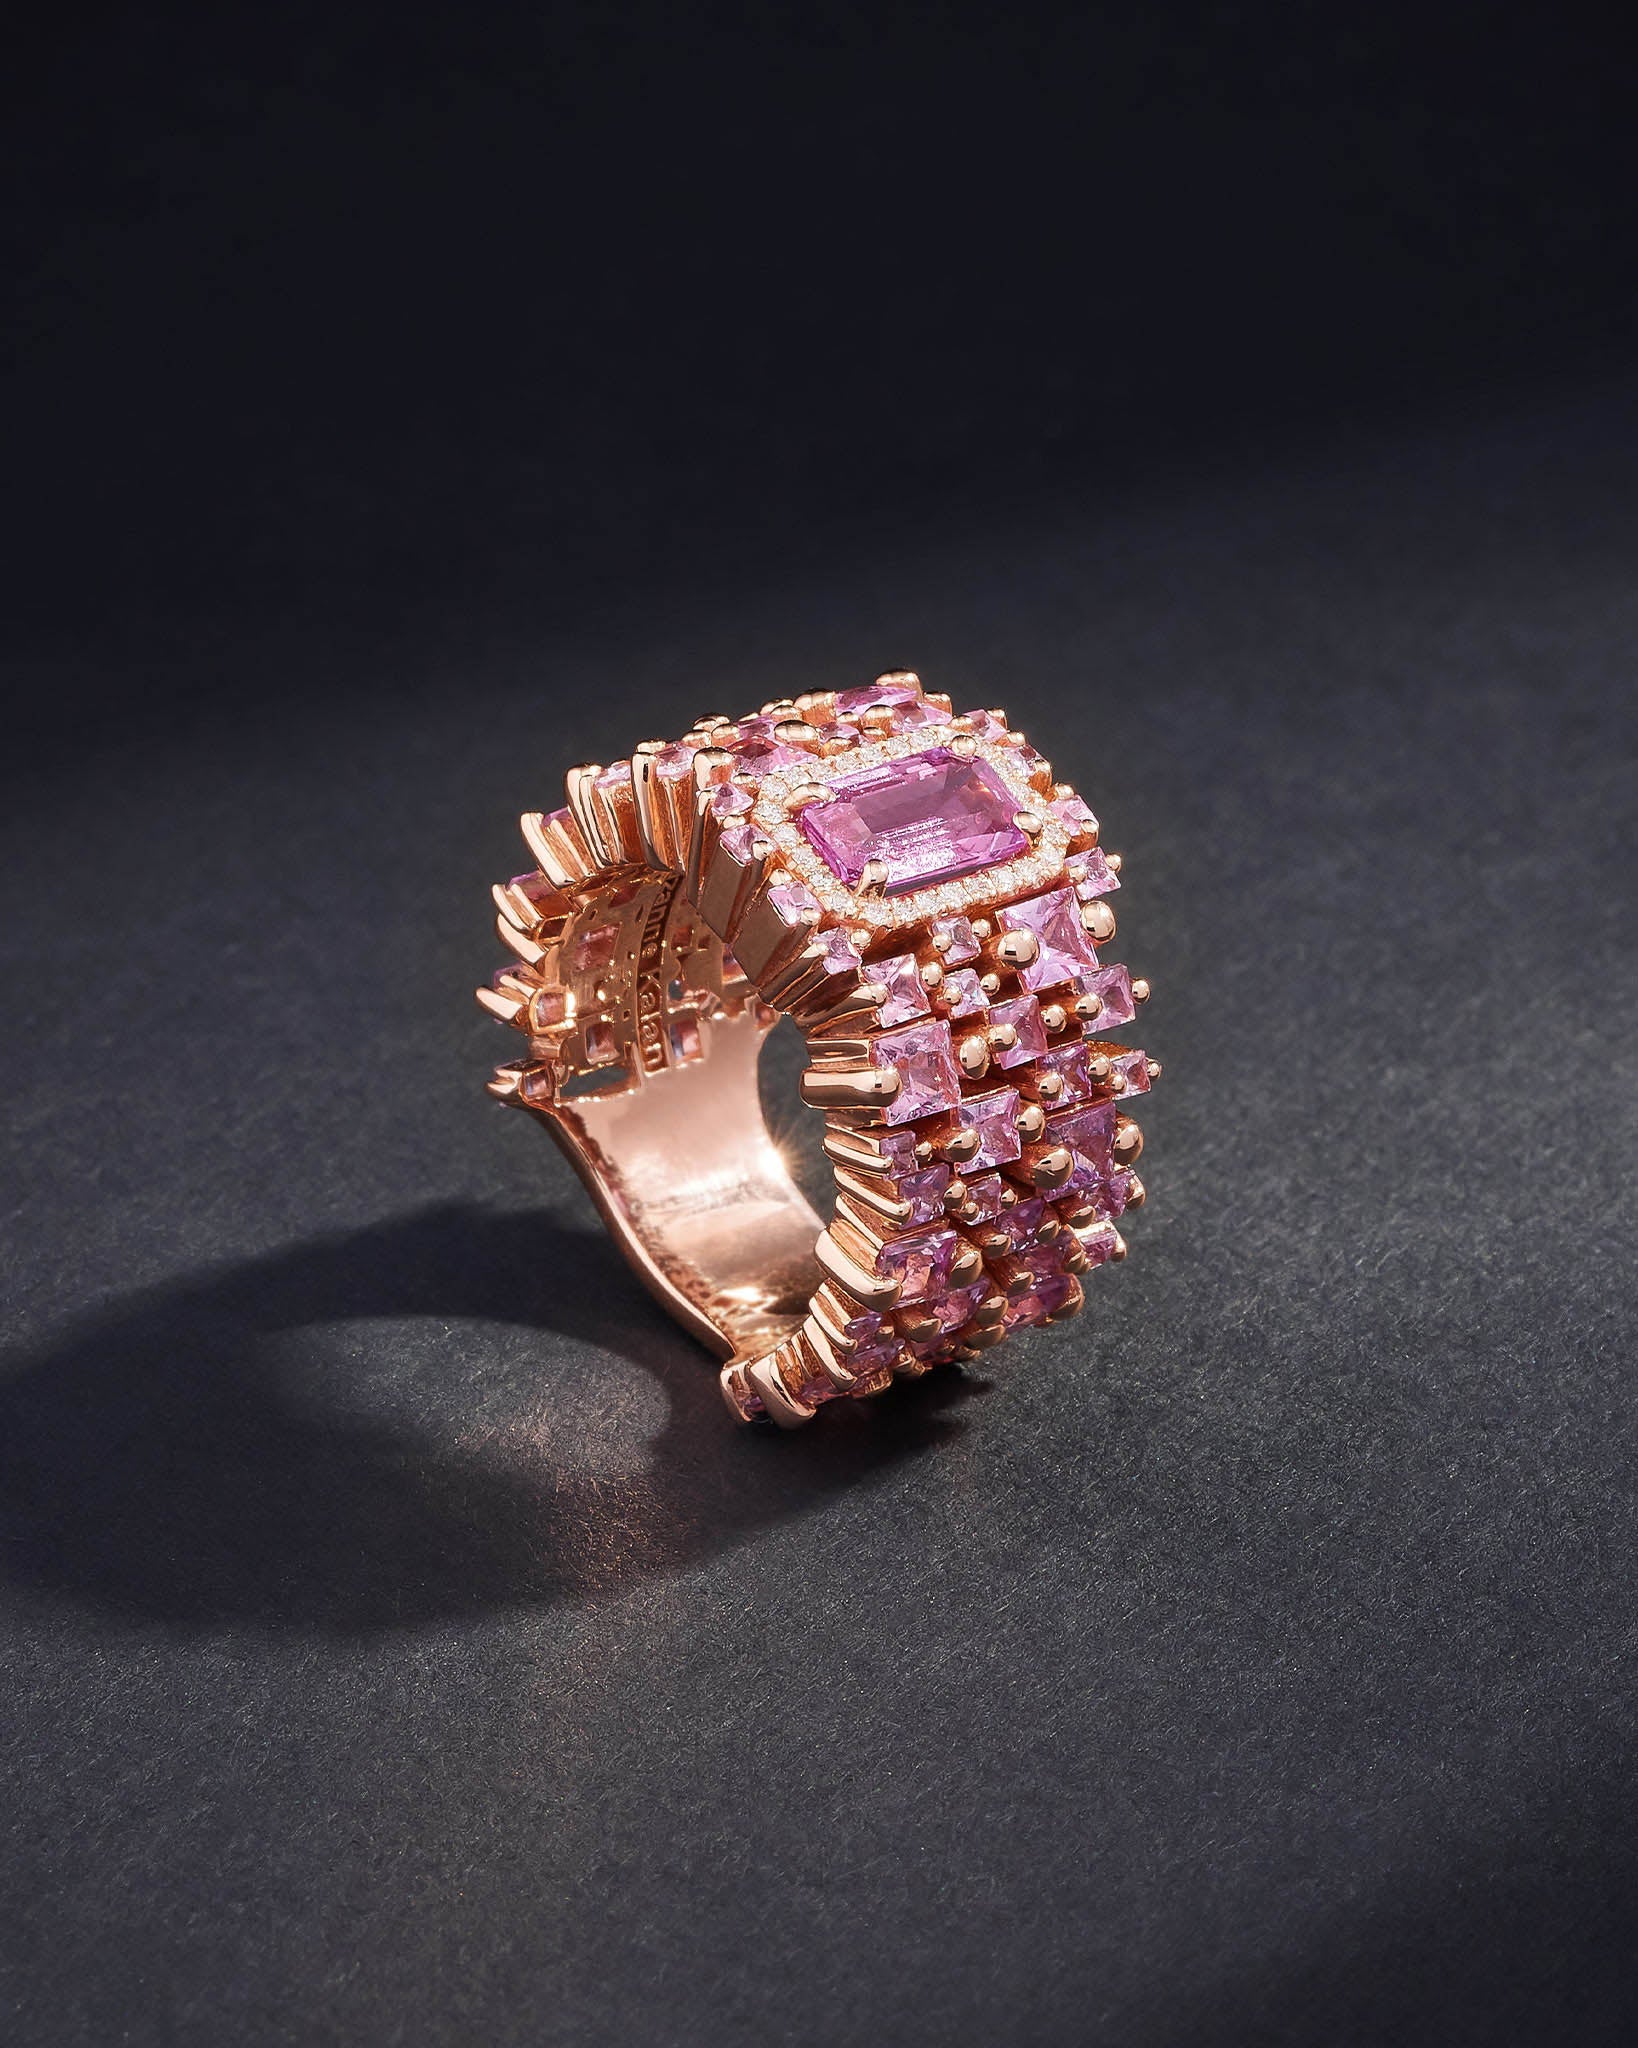 Suzanne Kalan One of a Kind Emerald Cut Pink Sapphire Cigar Band Ring in 18k rose gold